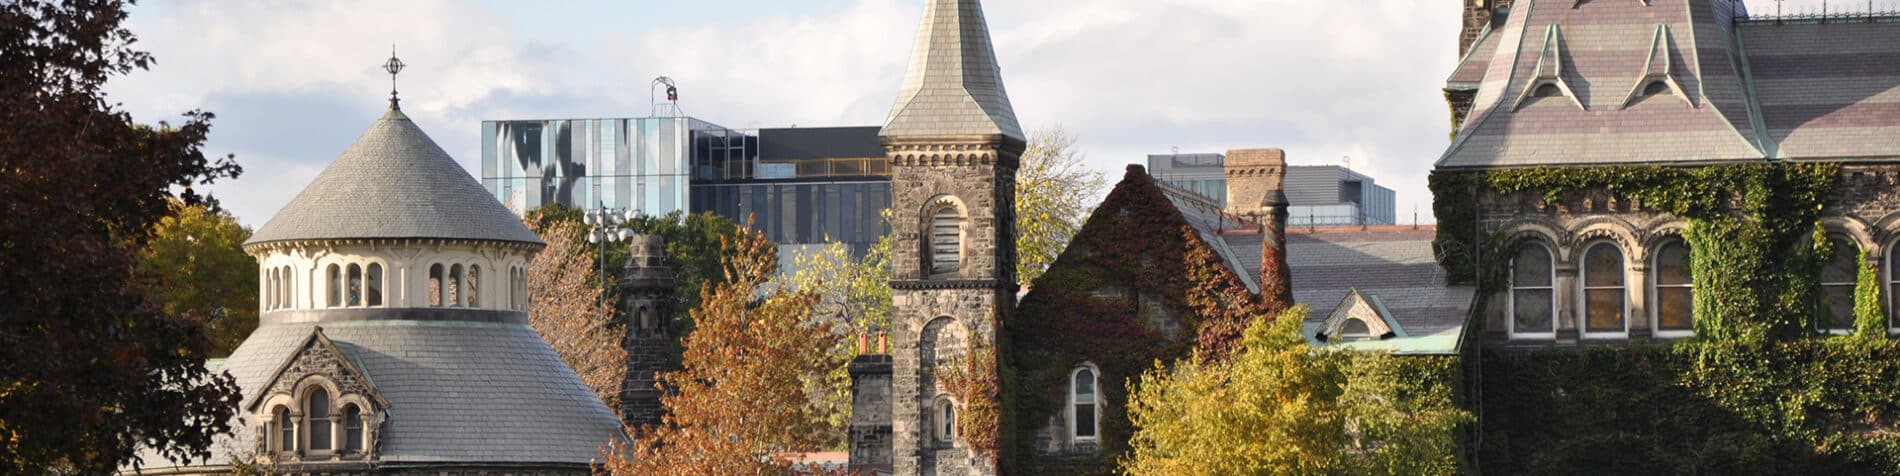 With Change Management, a Complete HR Transformation Adoption at University of Toronto